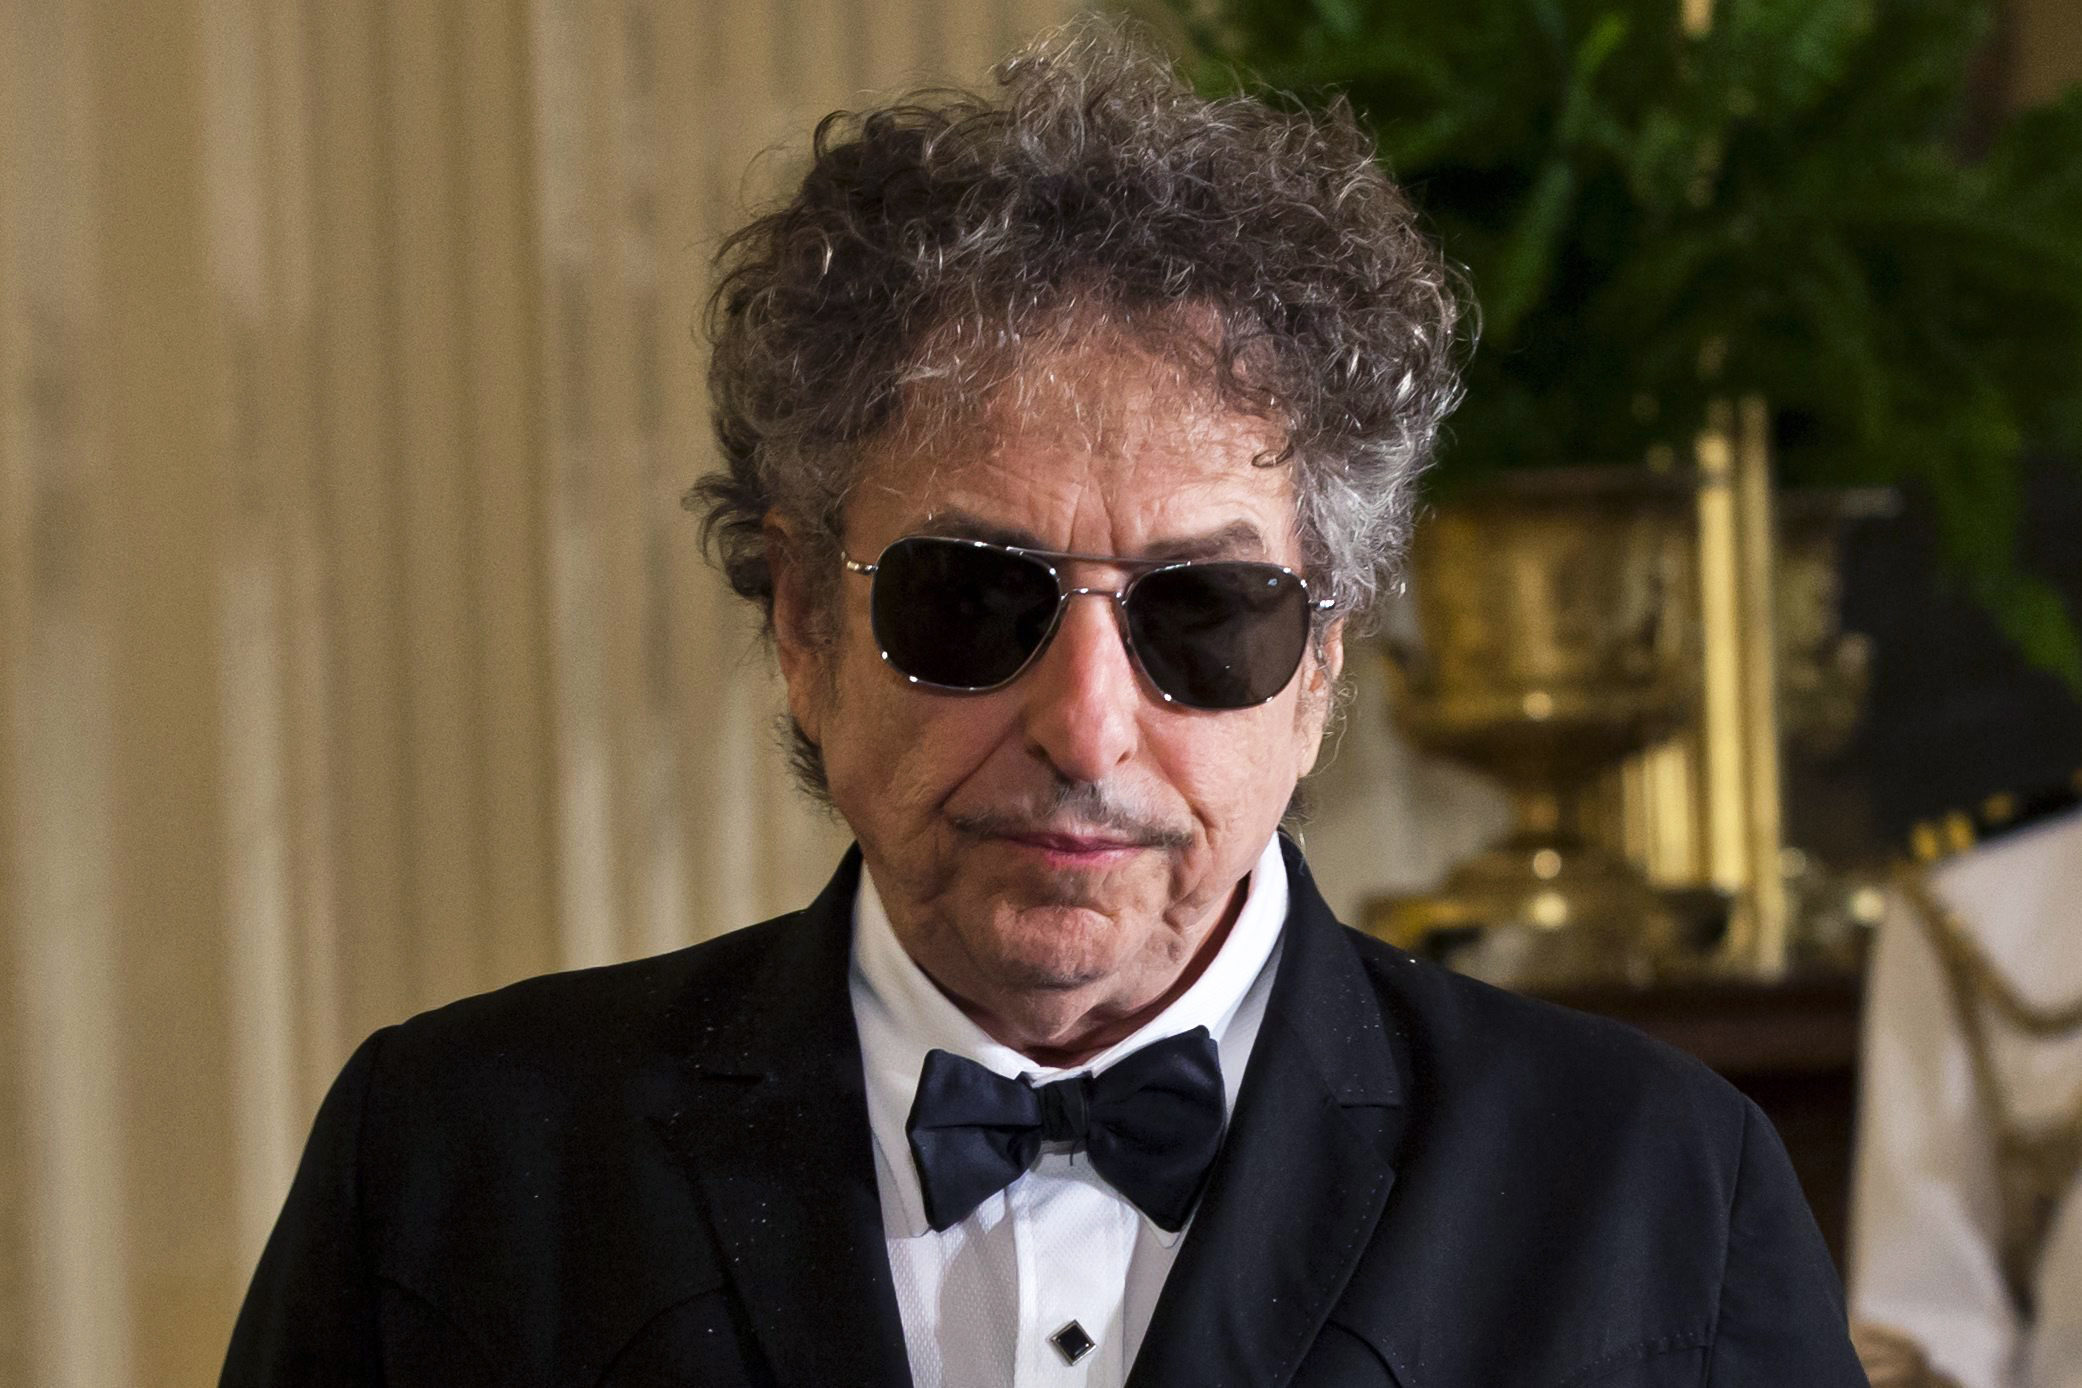 Folk music legend Bob Dylan in the East Room of the White House in Washington, D.C., on May 29, 2012. Dylan won the 2016 Nobel Prize in Literature, the Swedish Academy announced in Stockholm, on Oct. 13, 2016. (Jim Lo Scalzo—EPA)